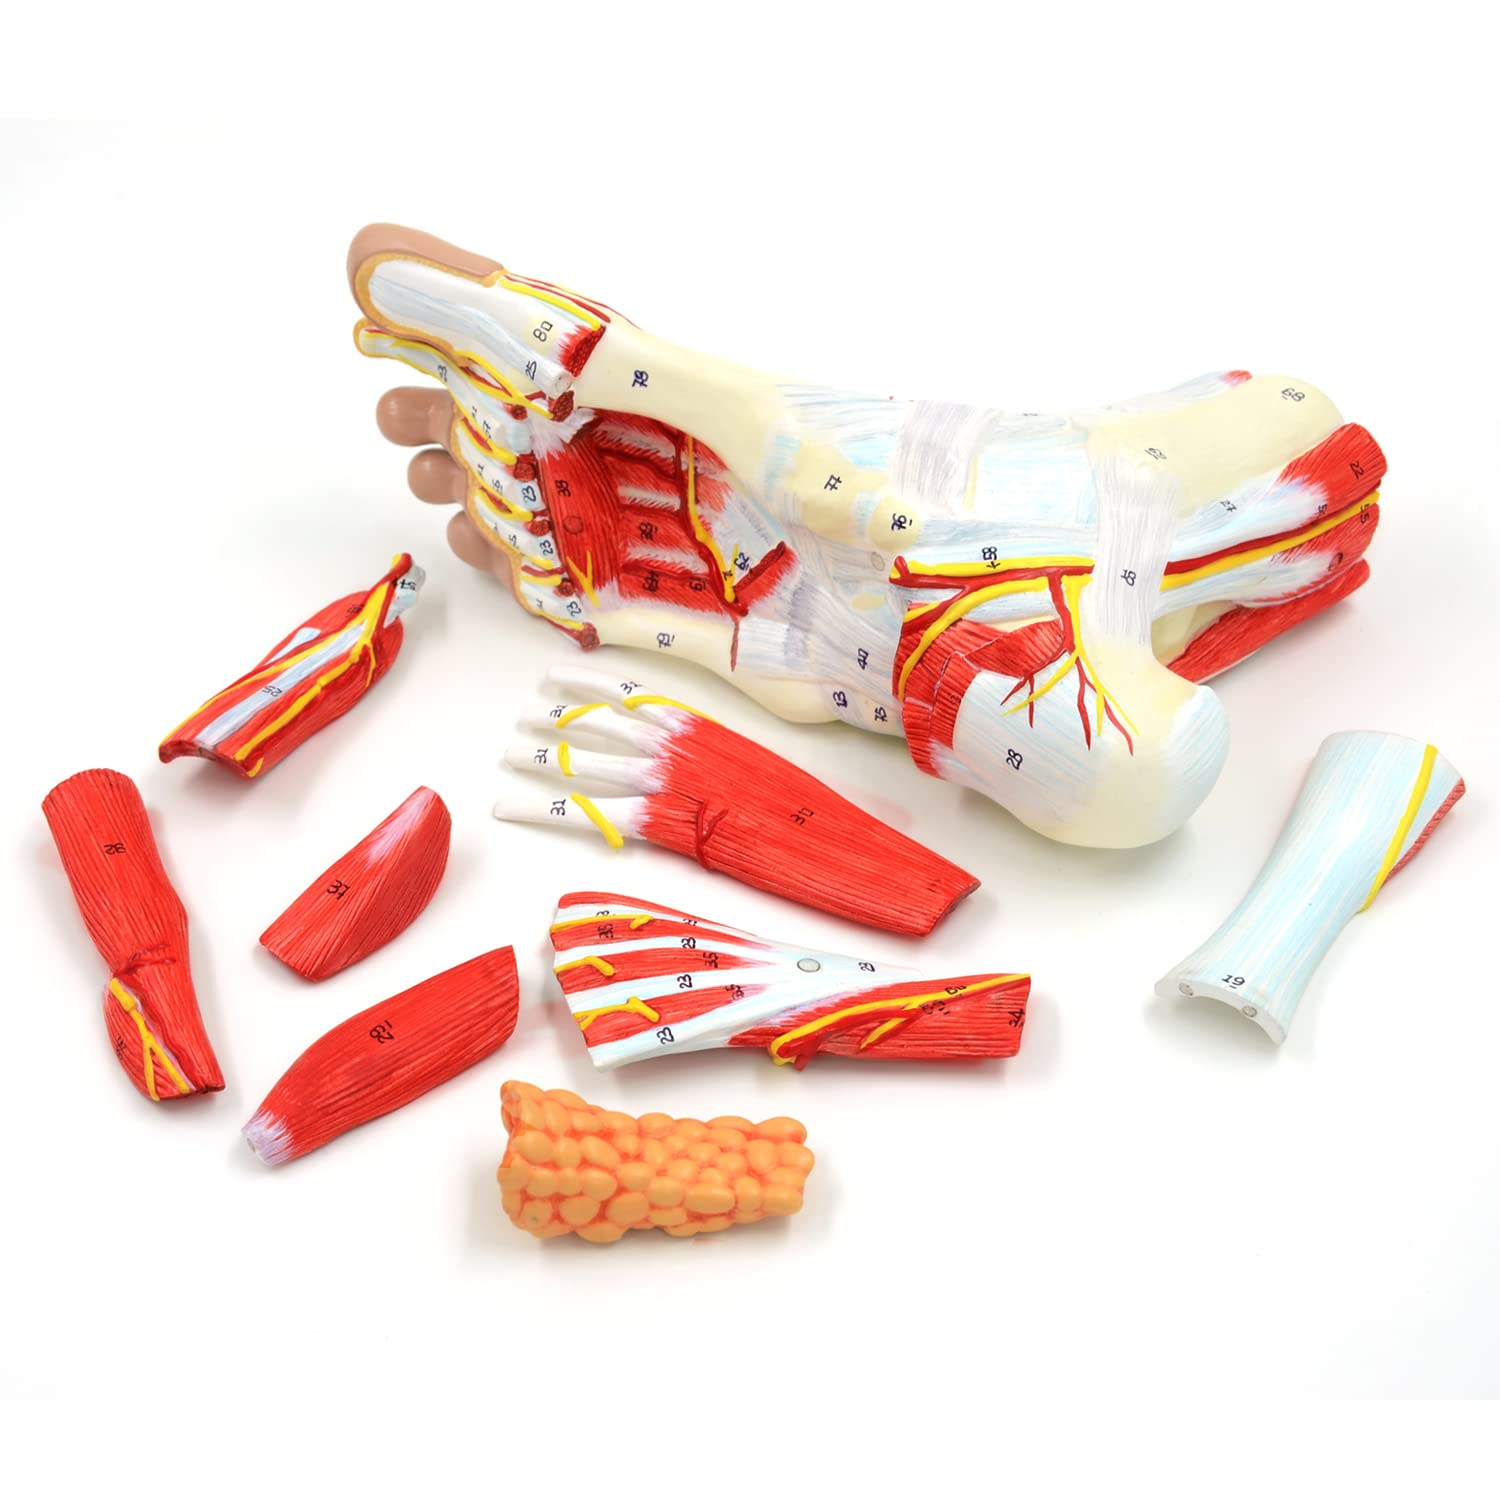 RONTEN Human Foot Anatomy Model With 9 Detachable Parts With The Muscles Ligaments Nerves And Arteries